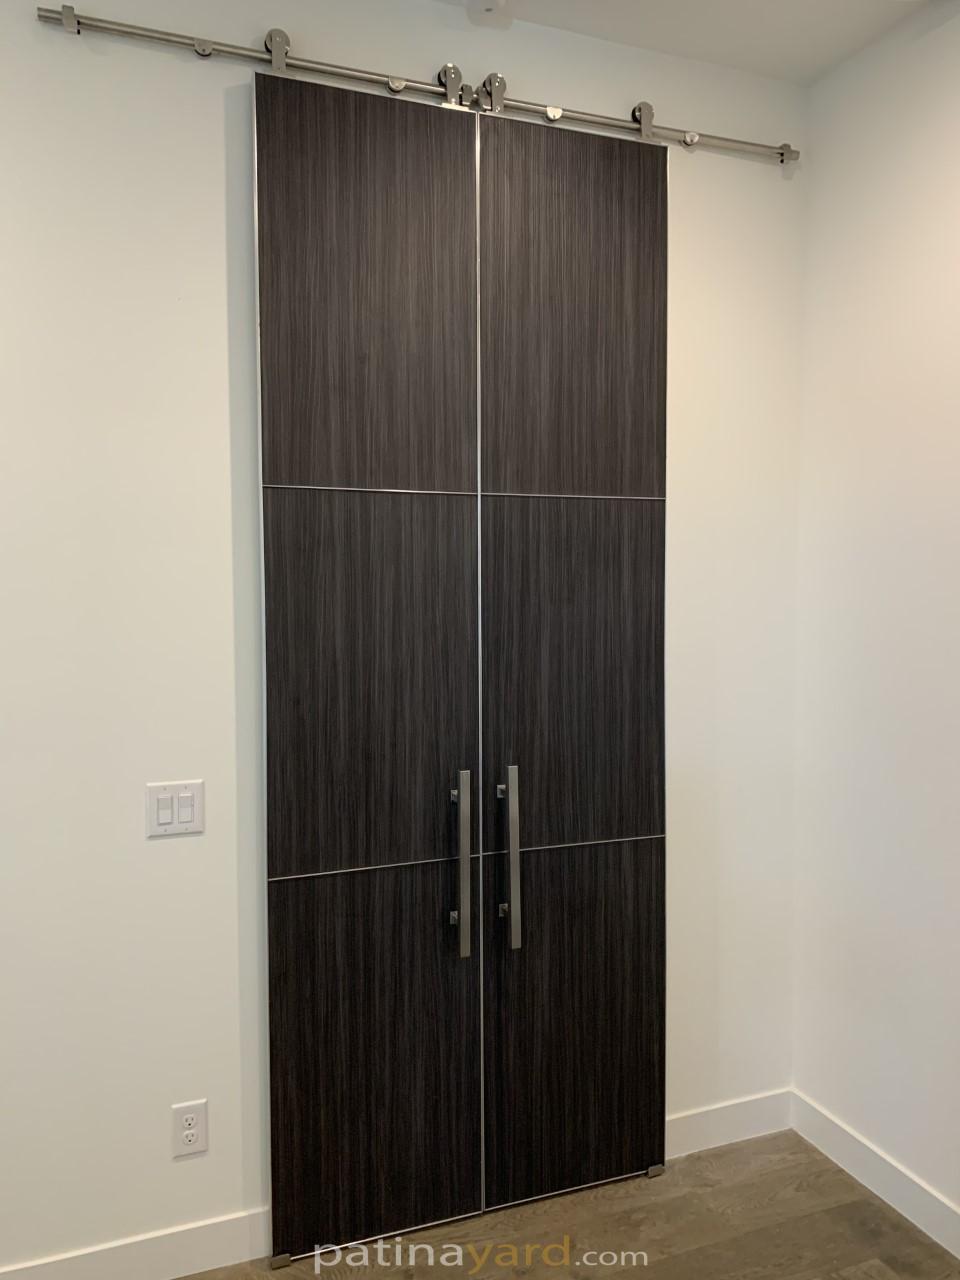 bella laminate double barn doors with stainless seams